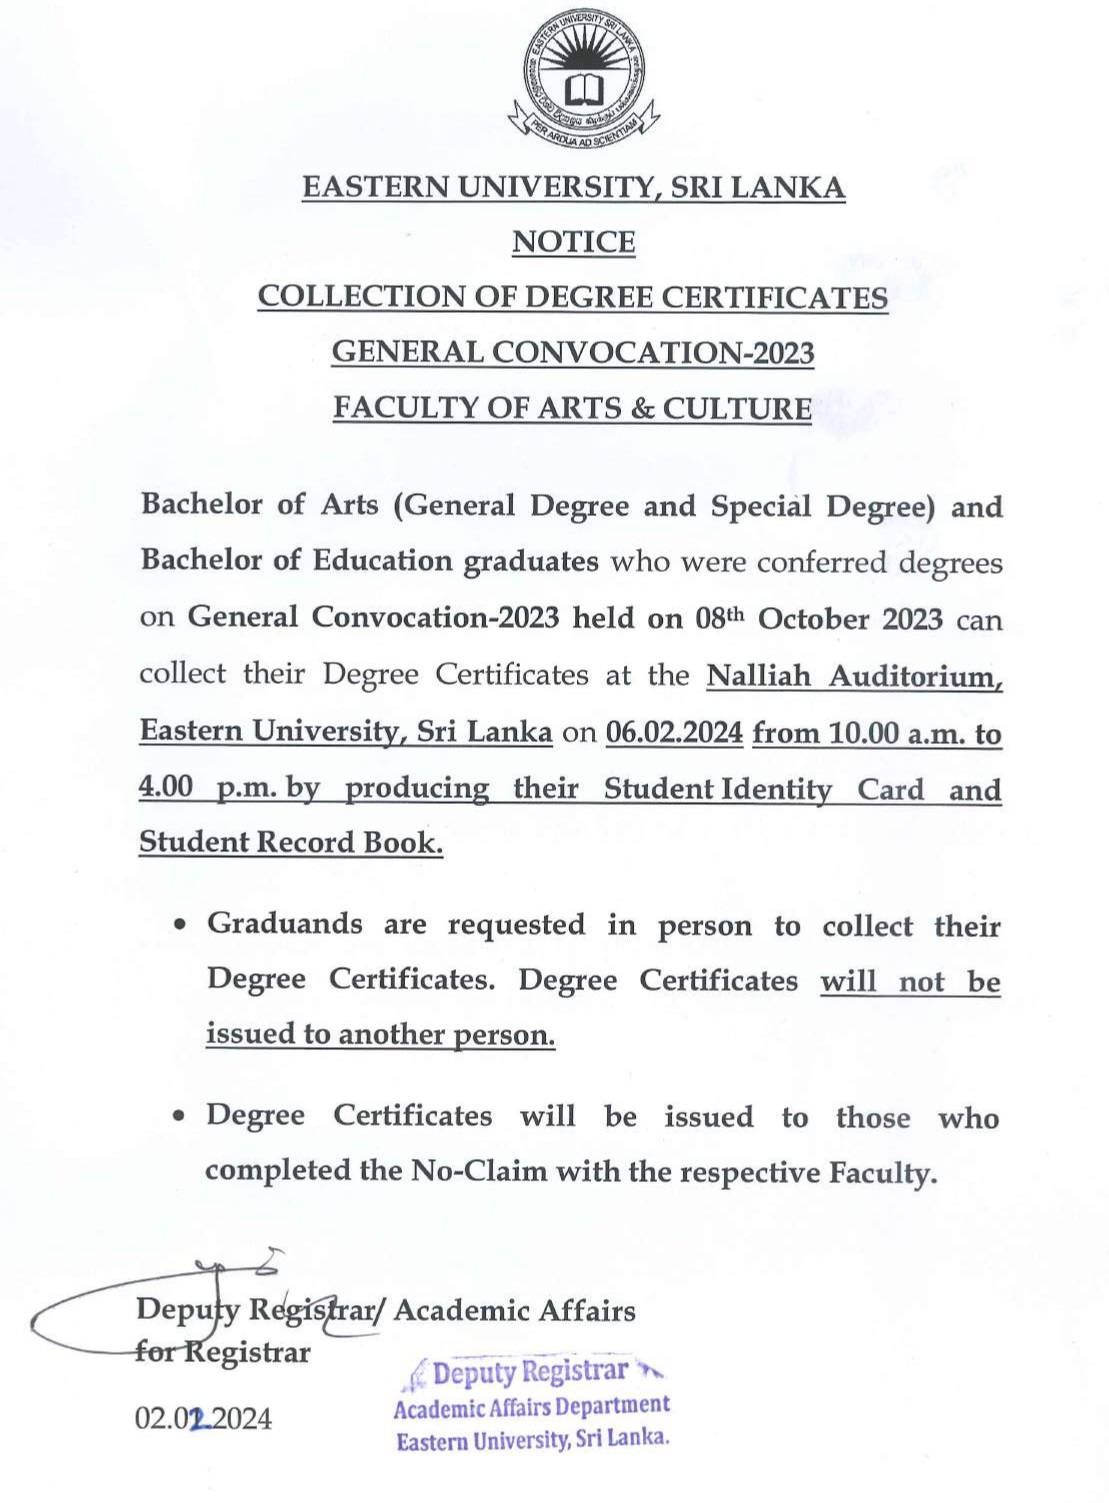  COLLECTION OF DEGREE CERTIFICATES-FACULTY OF ARTS & CULTURE_page-0001.jpg